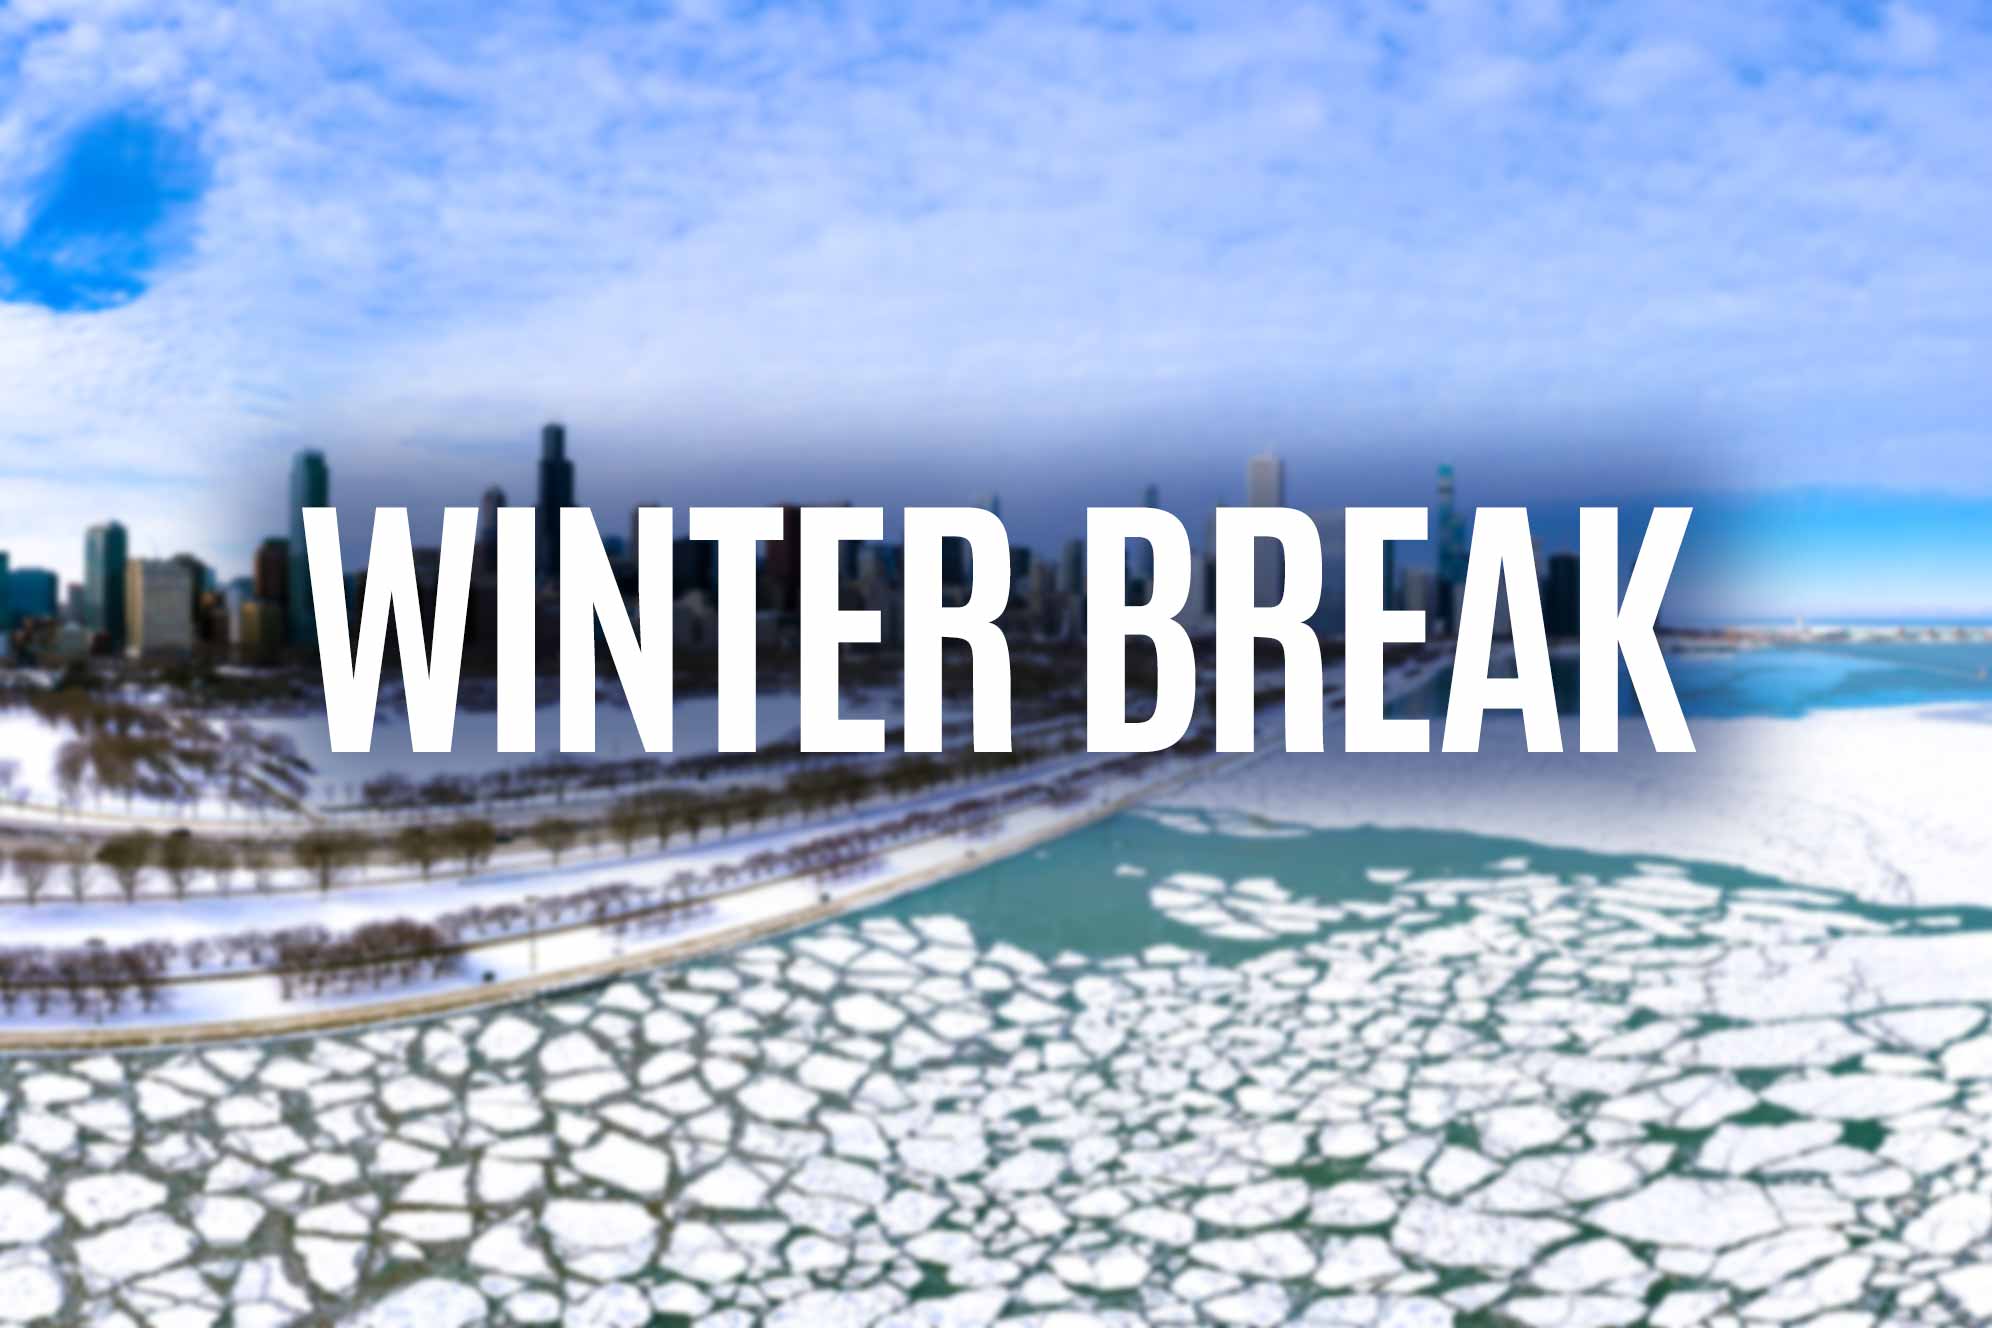 Winter Break text over photo of a partially frozen Lake Michigan in Chicago